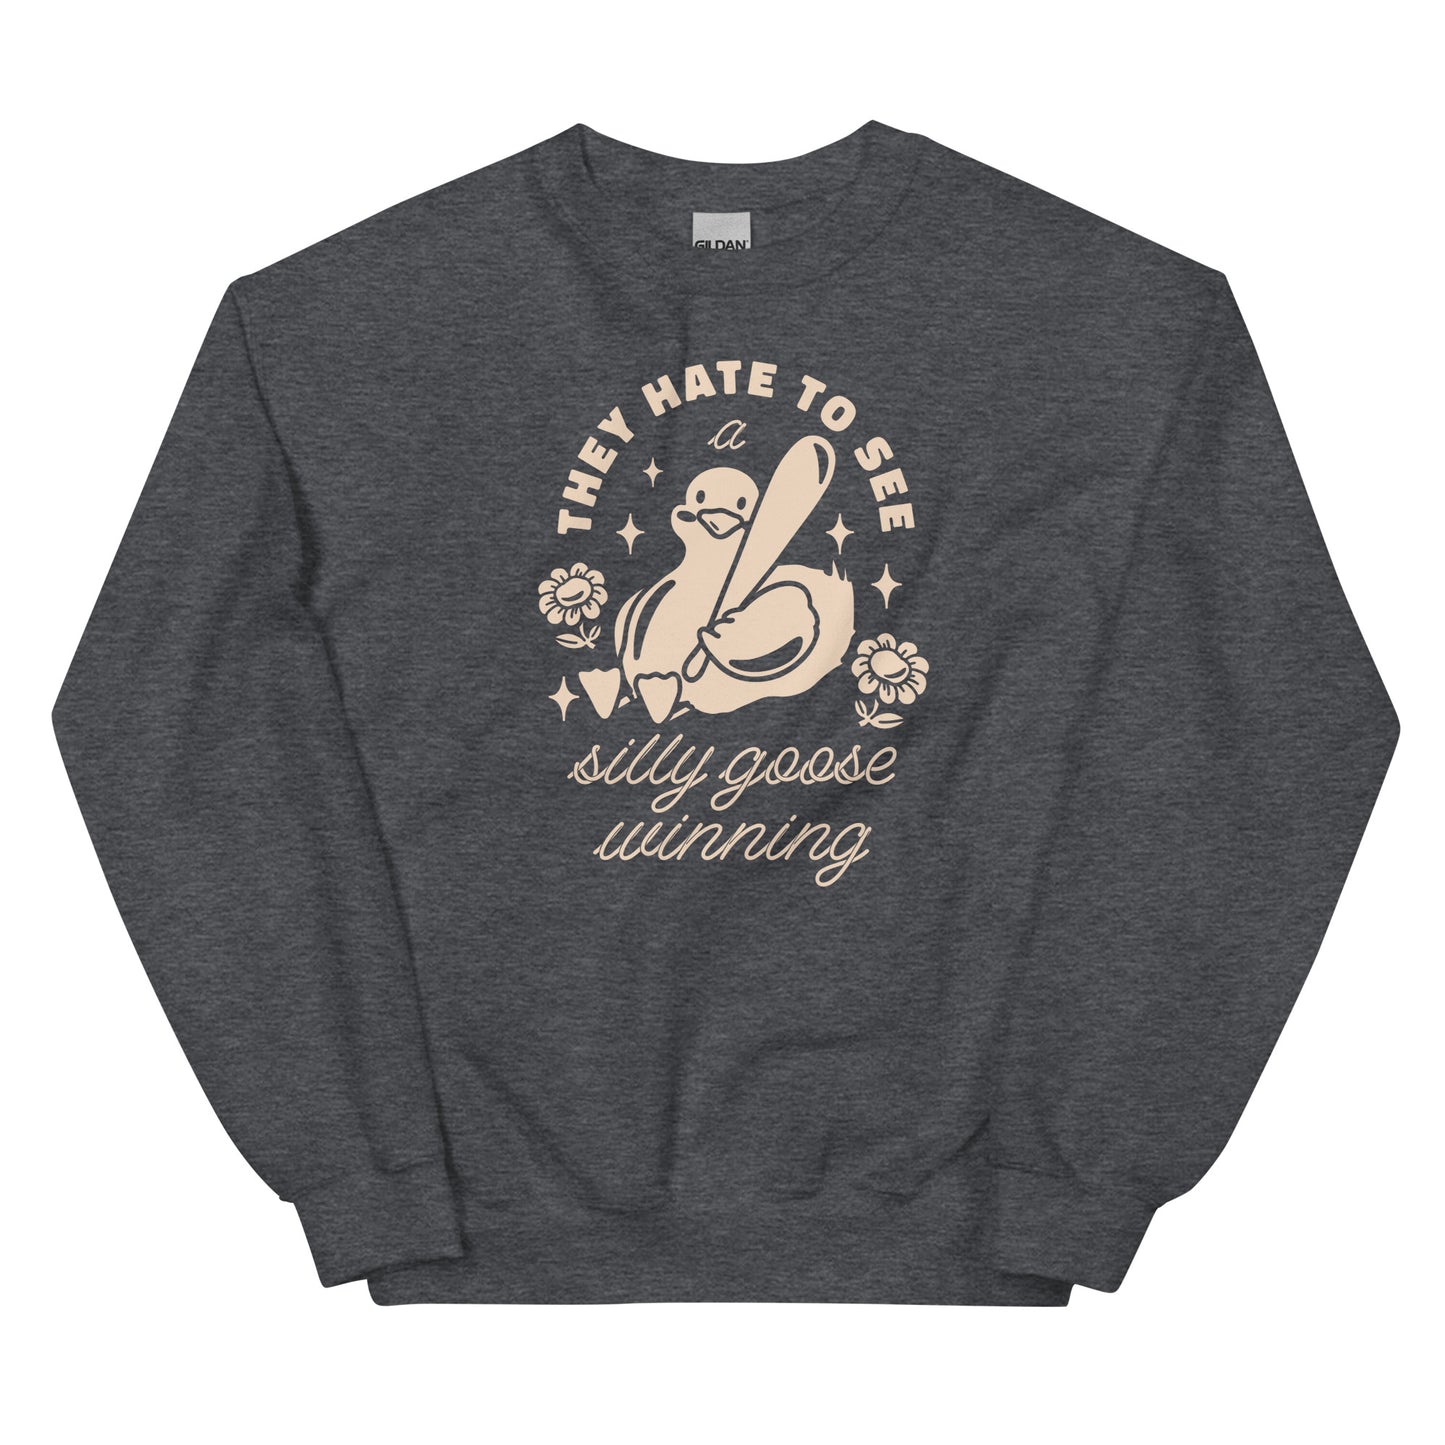 They Hate To See a Silly Goose Winning Unisex Sweatshirt